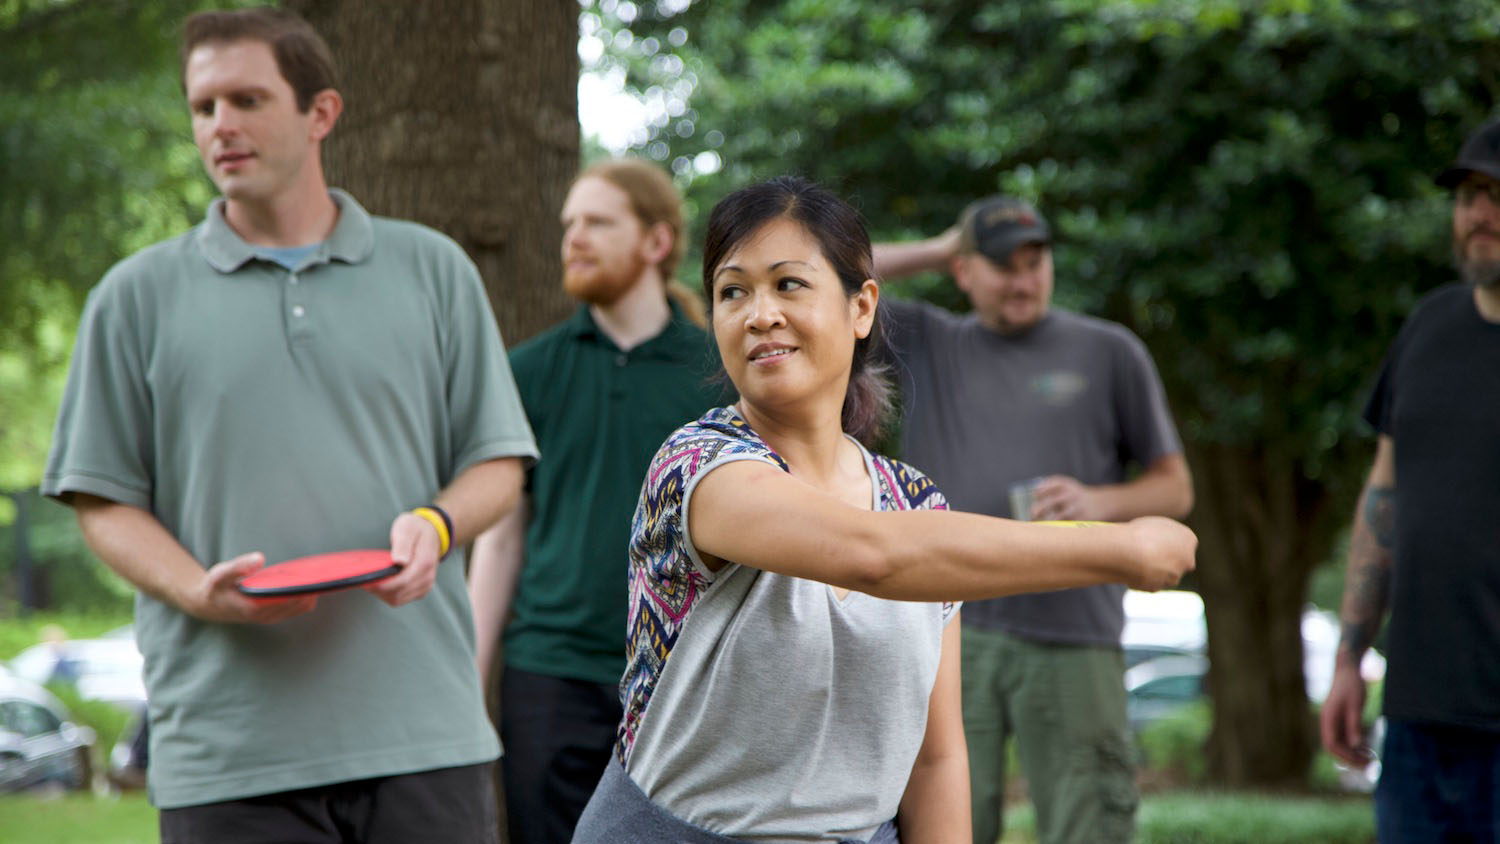 Arlene Mendoza-Moran and colleagues playing frisbee outside.